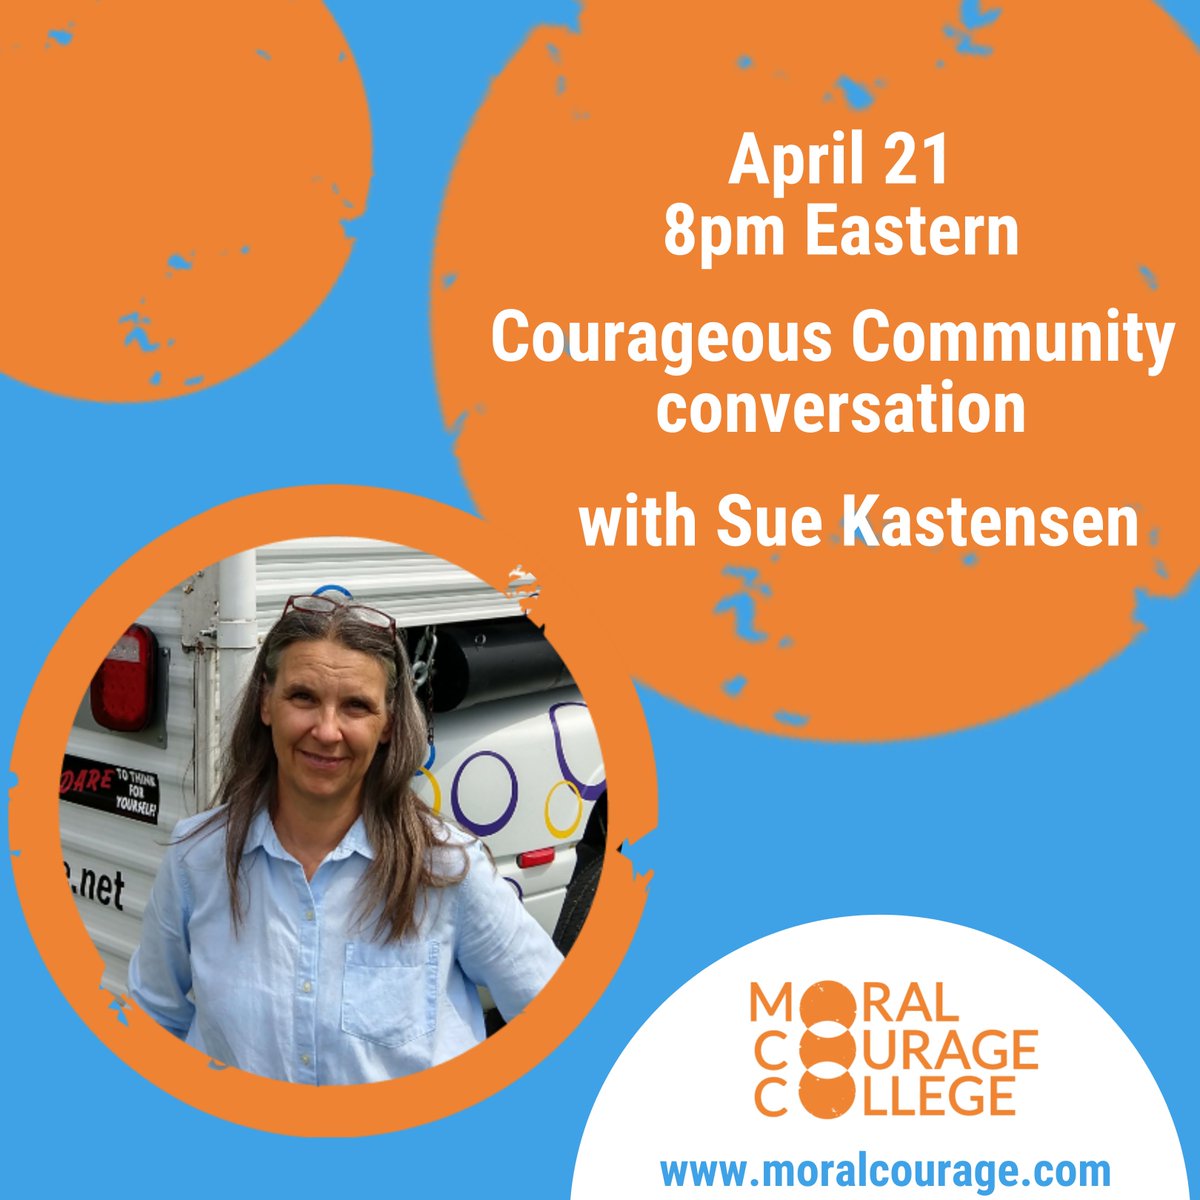 We're launching conversations with ppl who are fixing culture thru BOTH/AND thinking rather than tribing out (yawn) thru EITHER/OR warring. On April 21 at 8 pm ET, meet Sue Kastensen. She works w prisoners & has a fascinating story to tell. Register 👇🏽 ow.ly/Afnh50IMliC